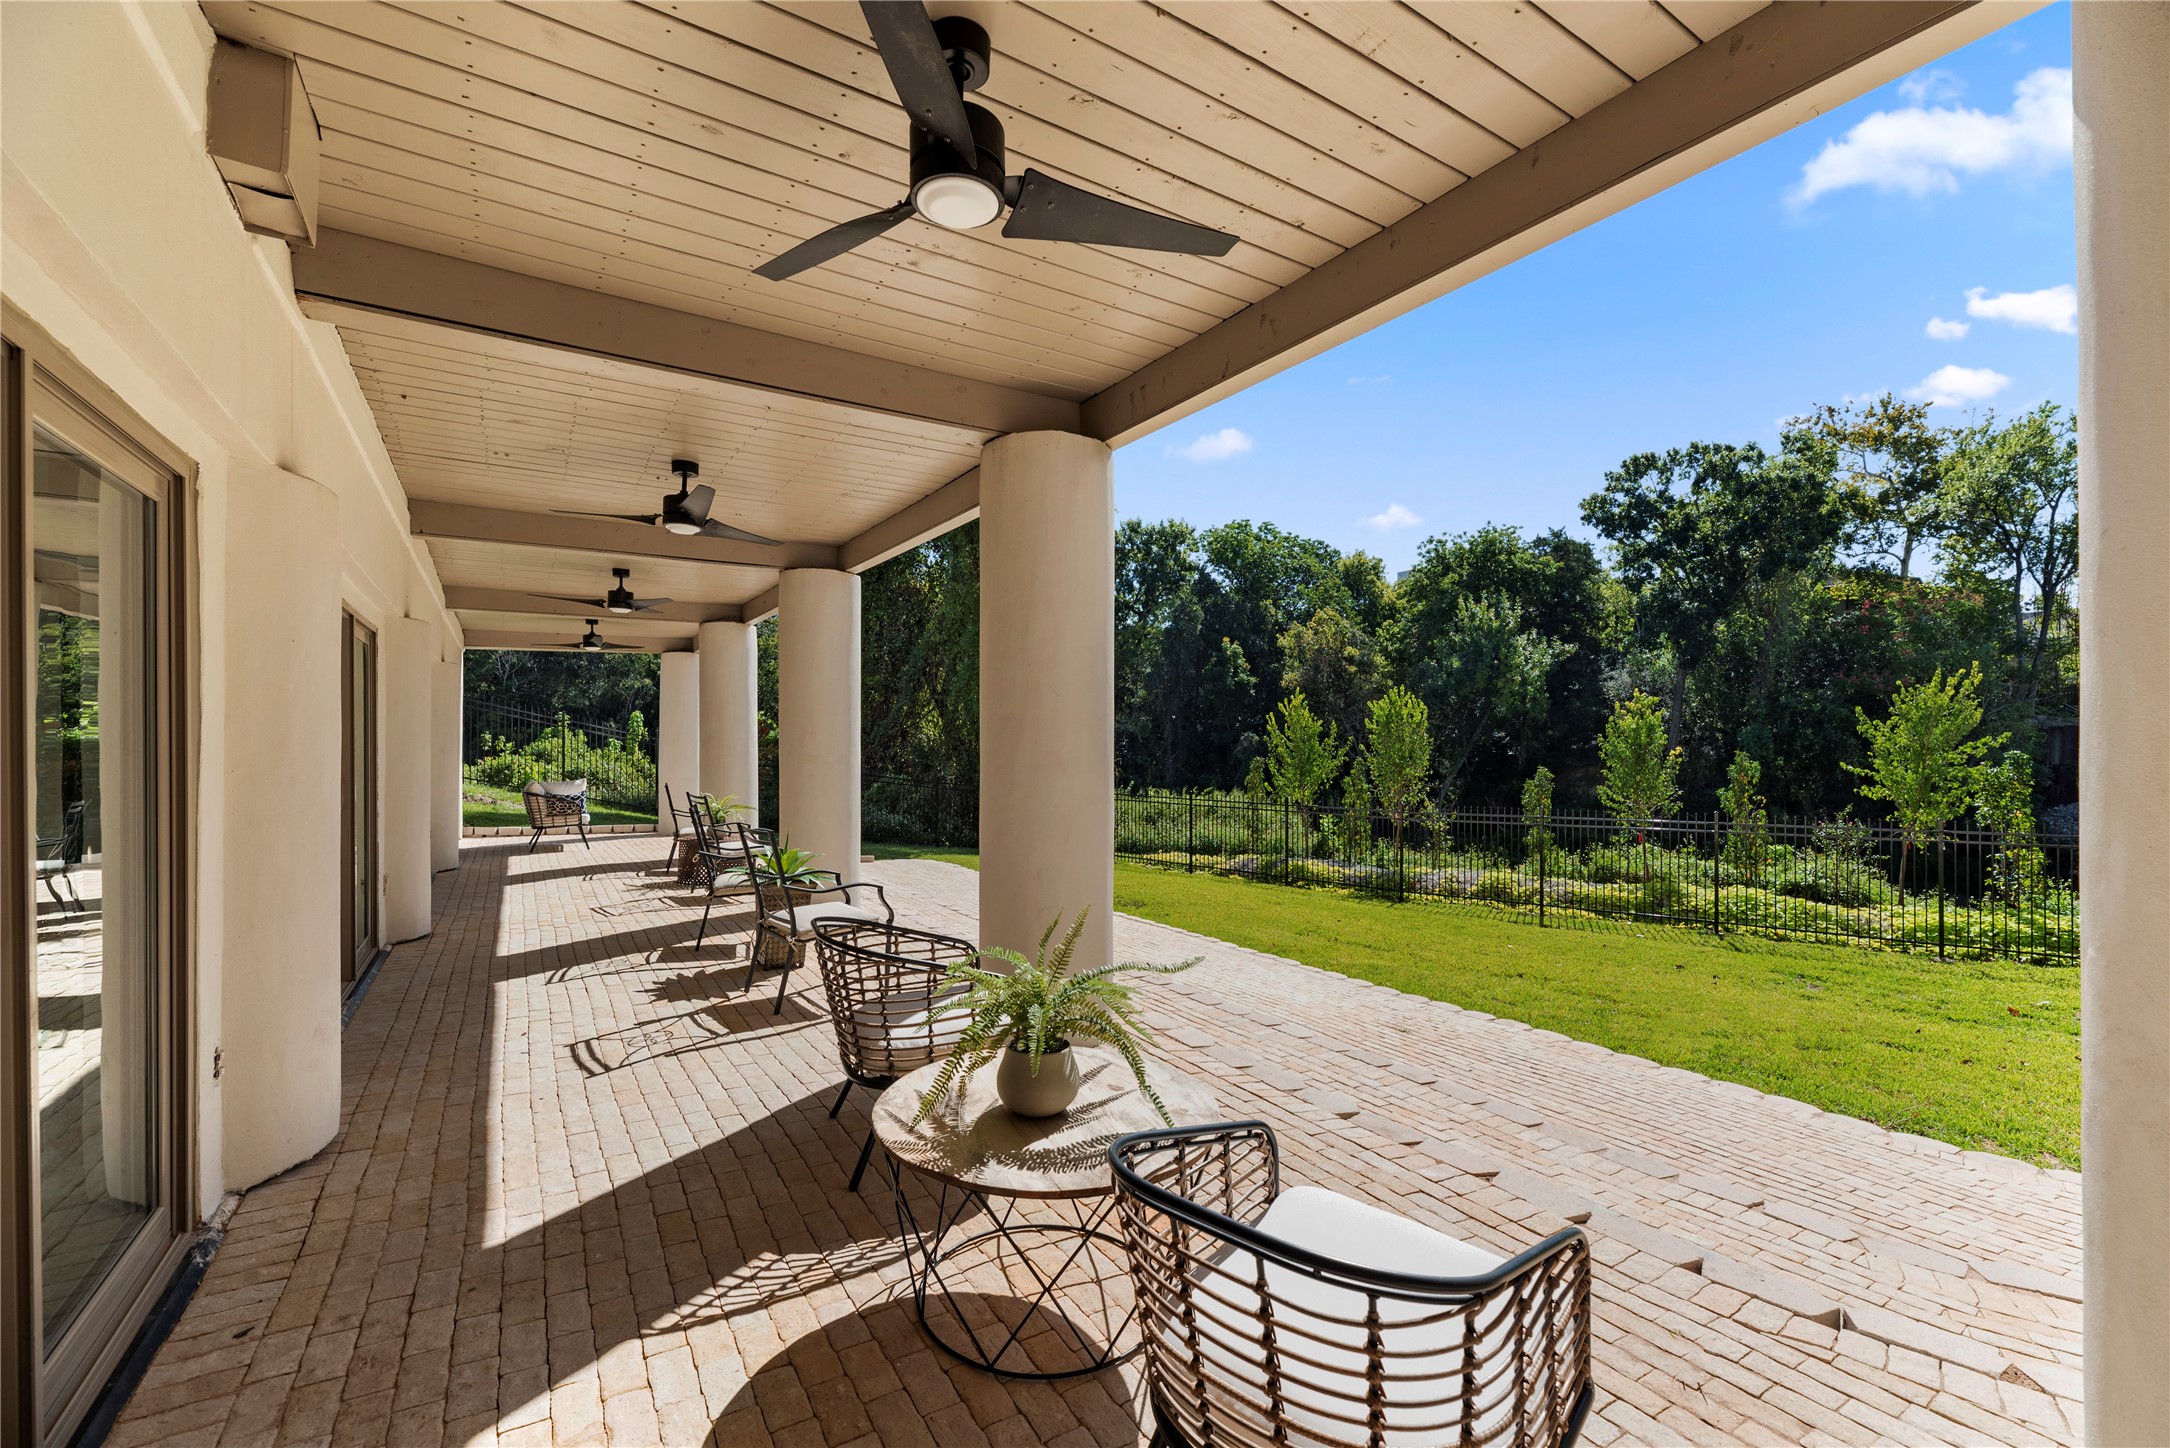 Relaxi this fall season on the  covered patio with ceiling fans & brick pavers. Cigar party anyone?